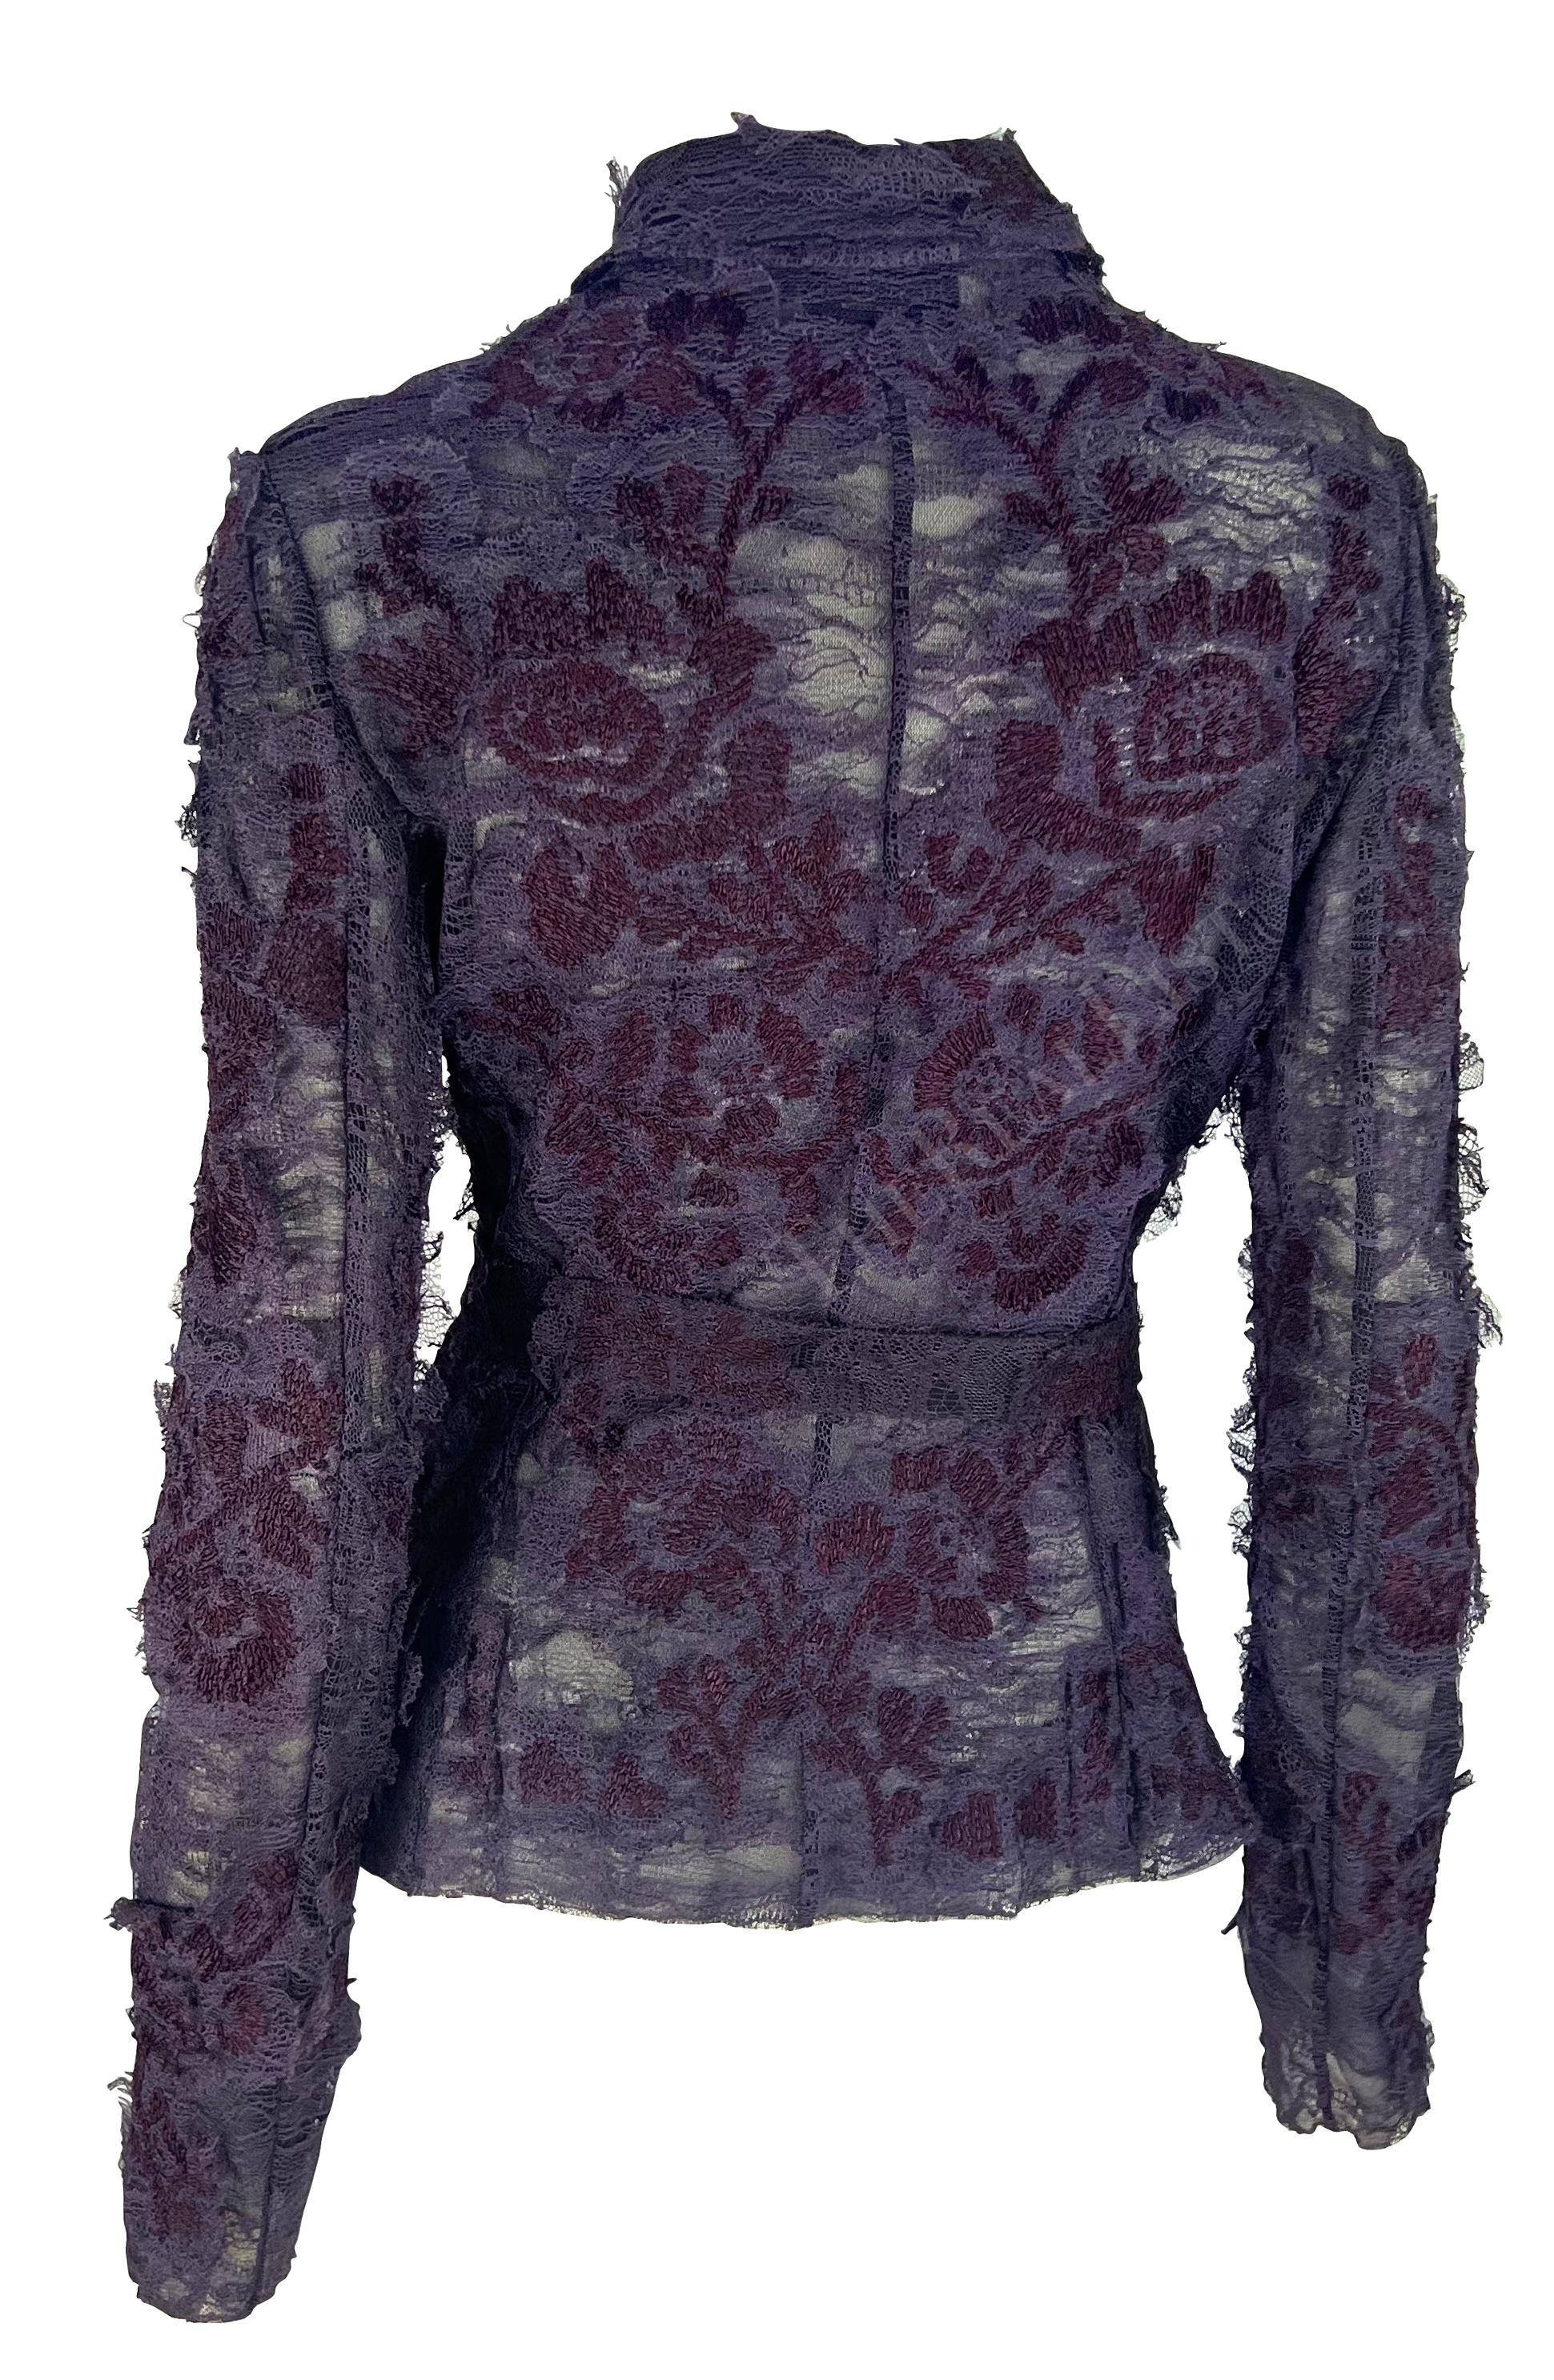 F/W 2001 Yves Saint Laurent by Tom Ford Runway Purple Floral Lace Tie Blouse For Sale 2